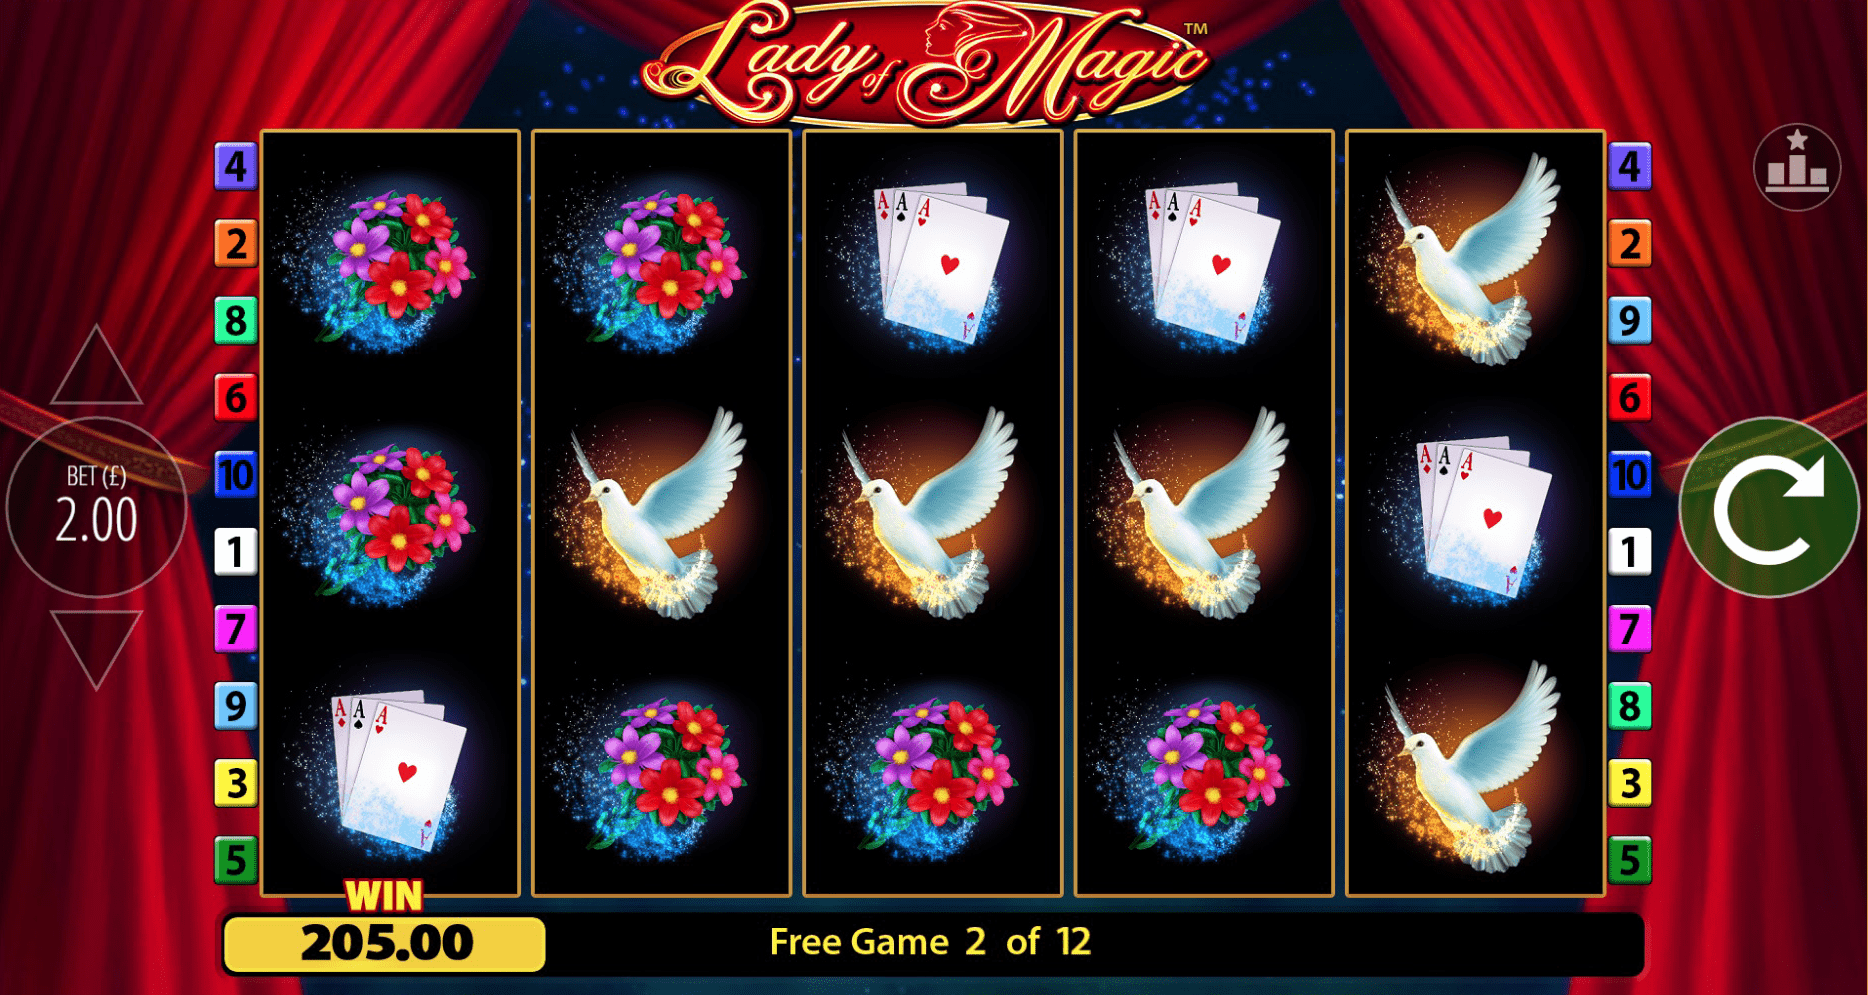 Lady Of Magic Free Spins